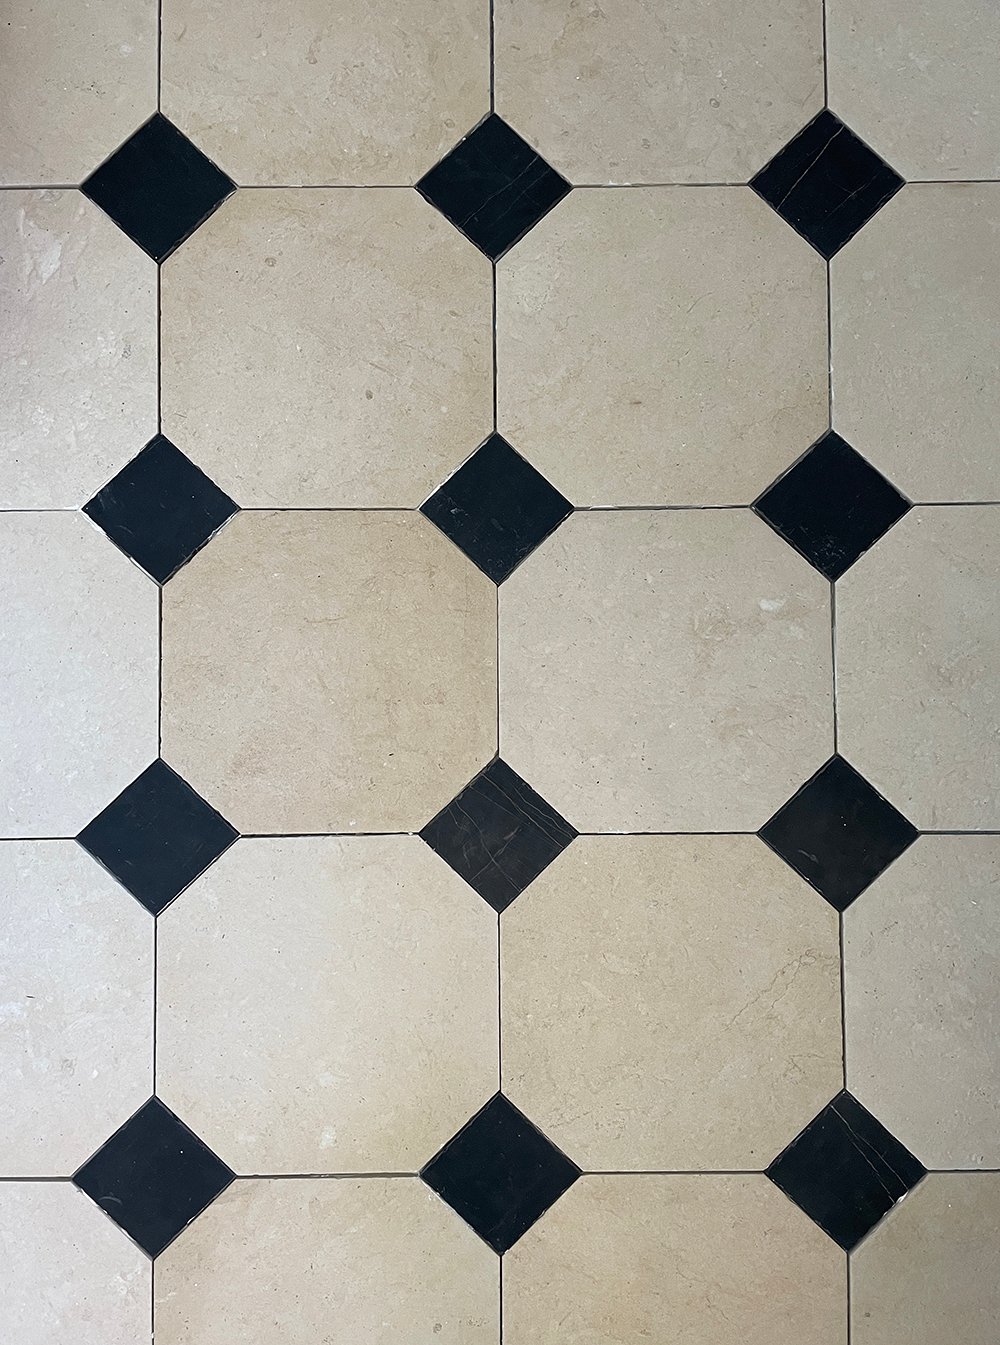 Our Entryway Tile + Alternative Options - roomfortuesday.com